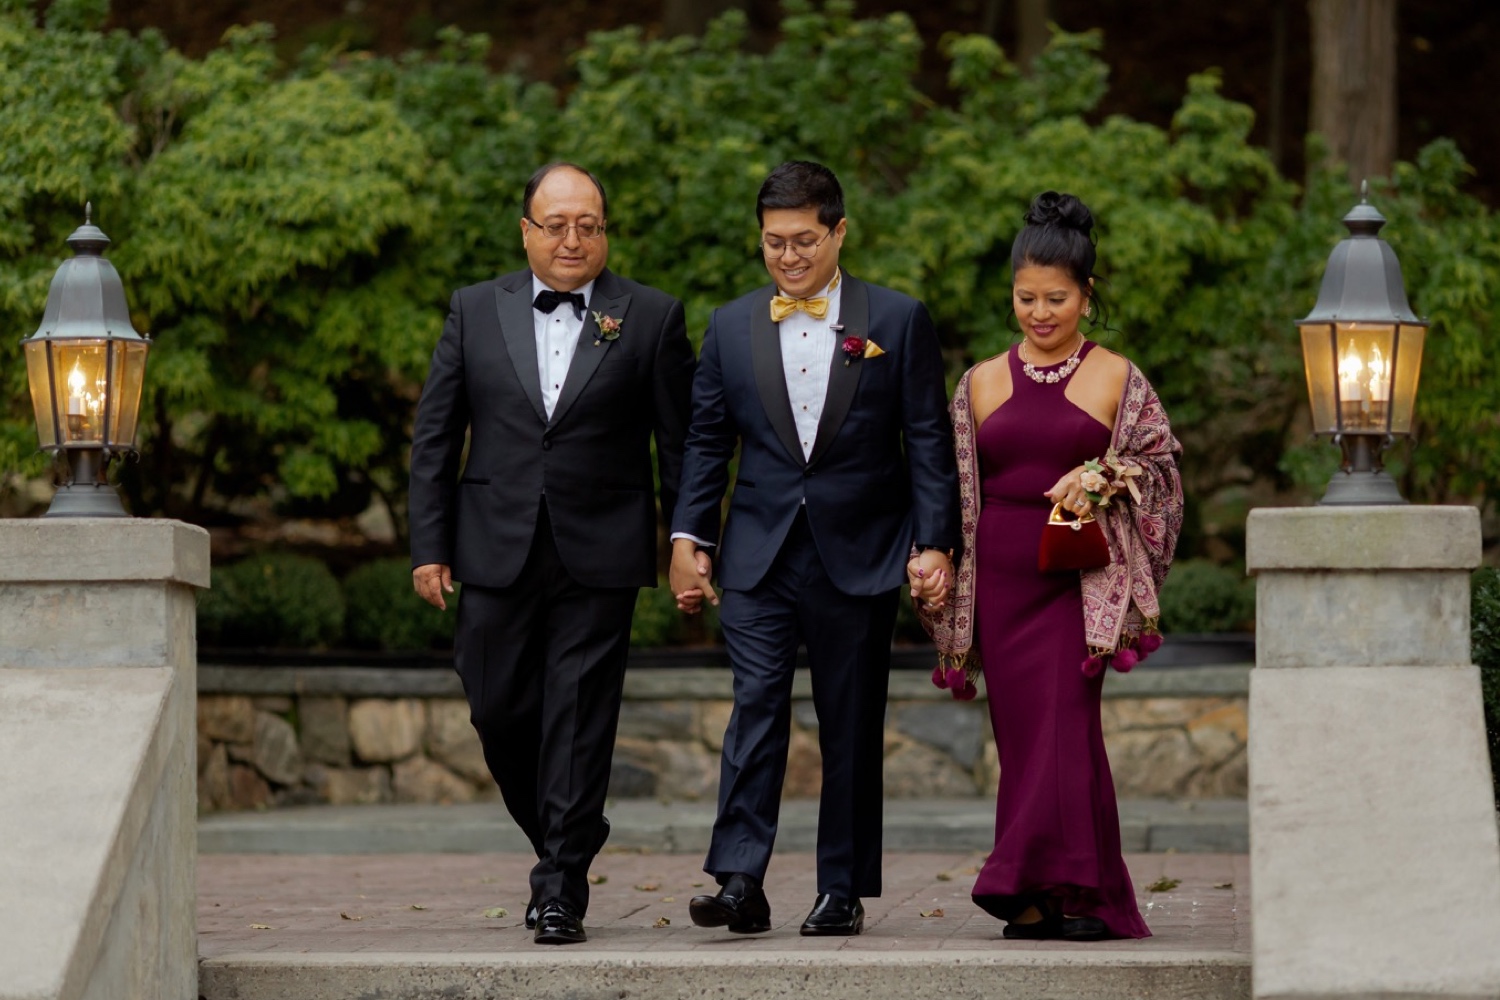 A groom and his parent walking towards the ceremony at the Tappan Hill Mansion.